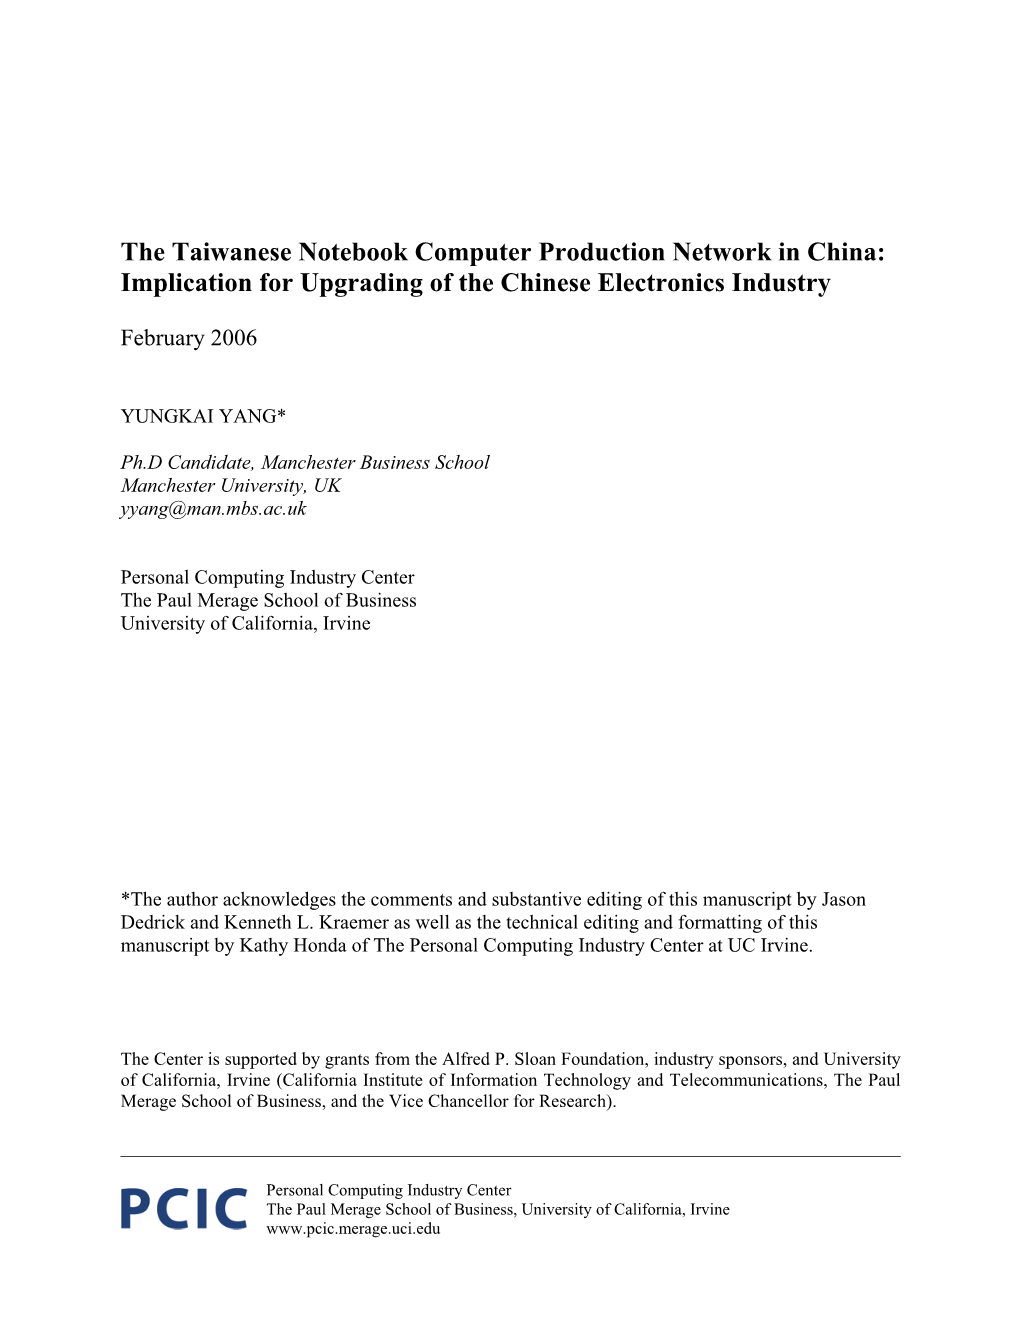 The Taiwanese Notebook Computer Production Network in China: Implication for Upgrading of the Chinese Electronics Industry